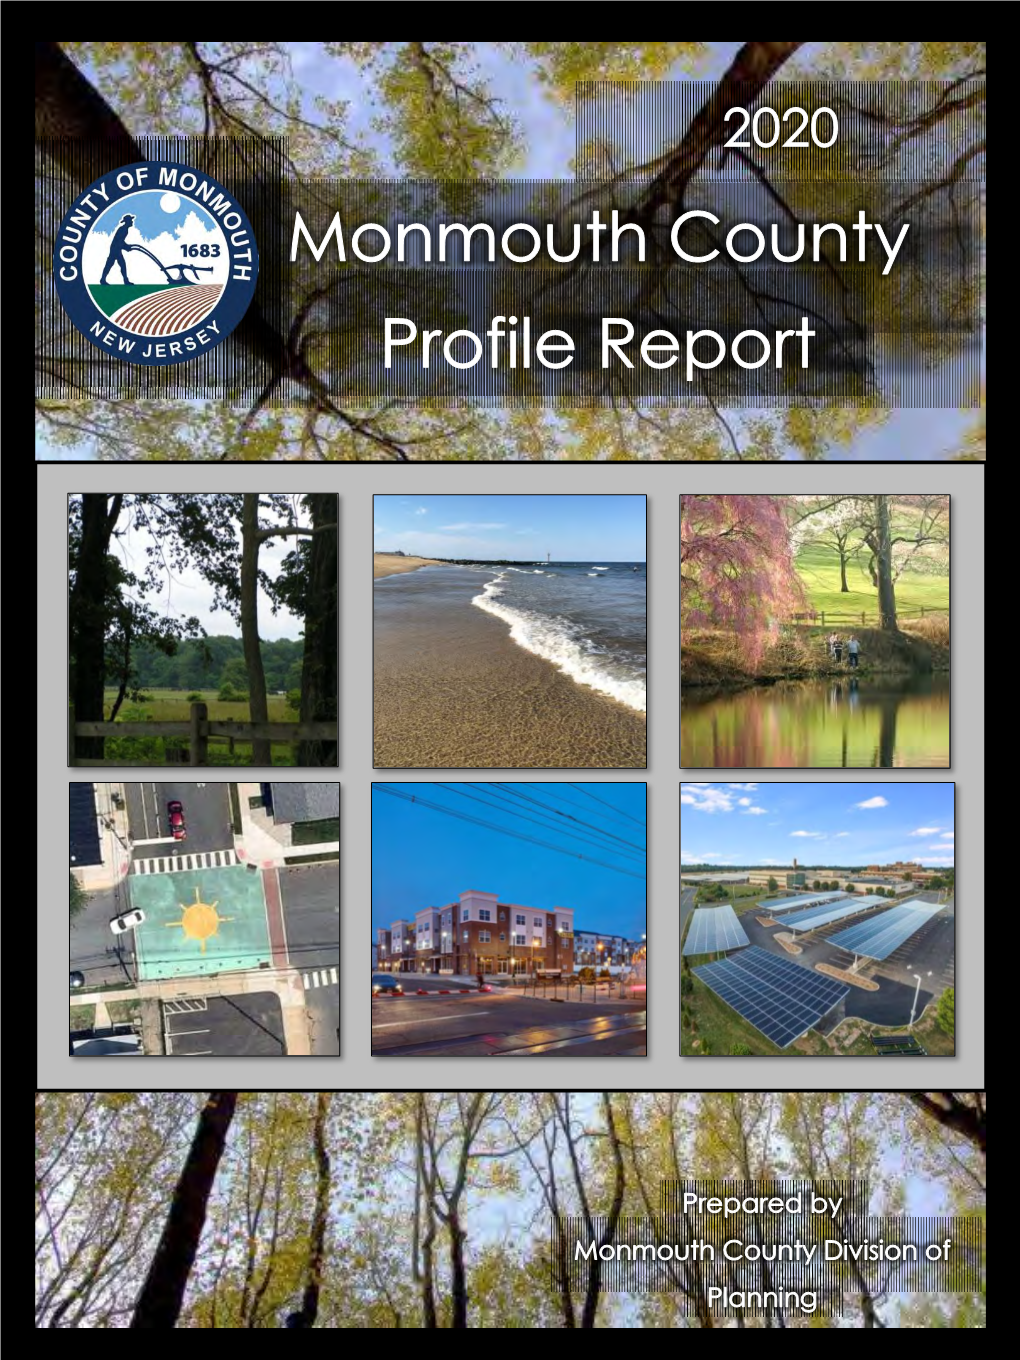 Monmouth County Profile 2020